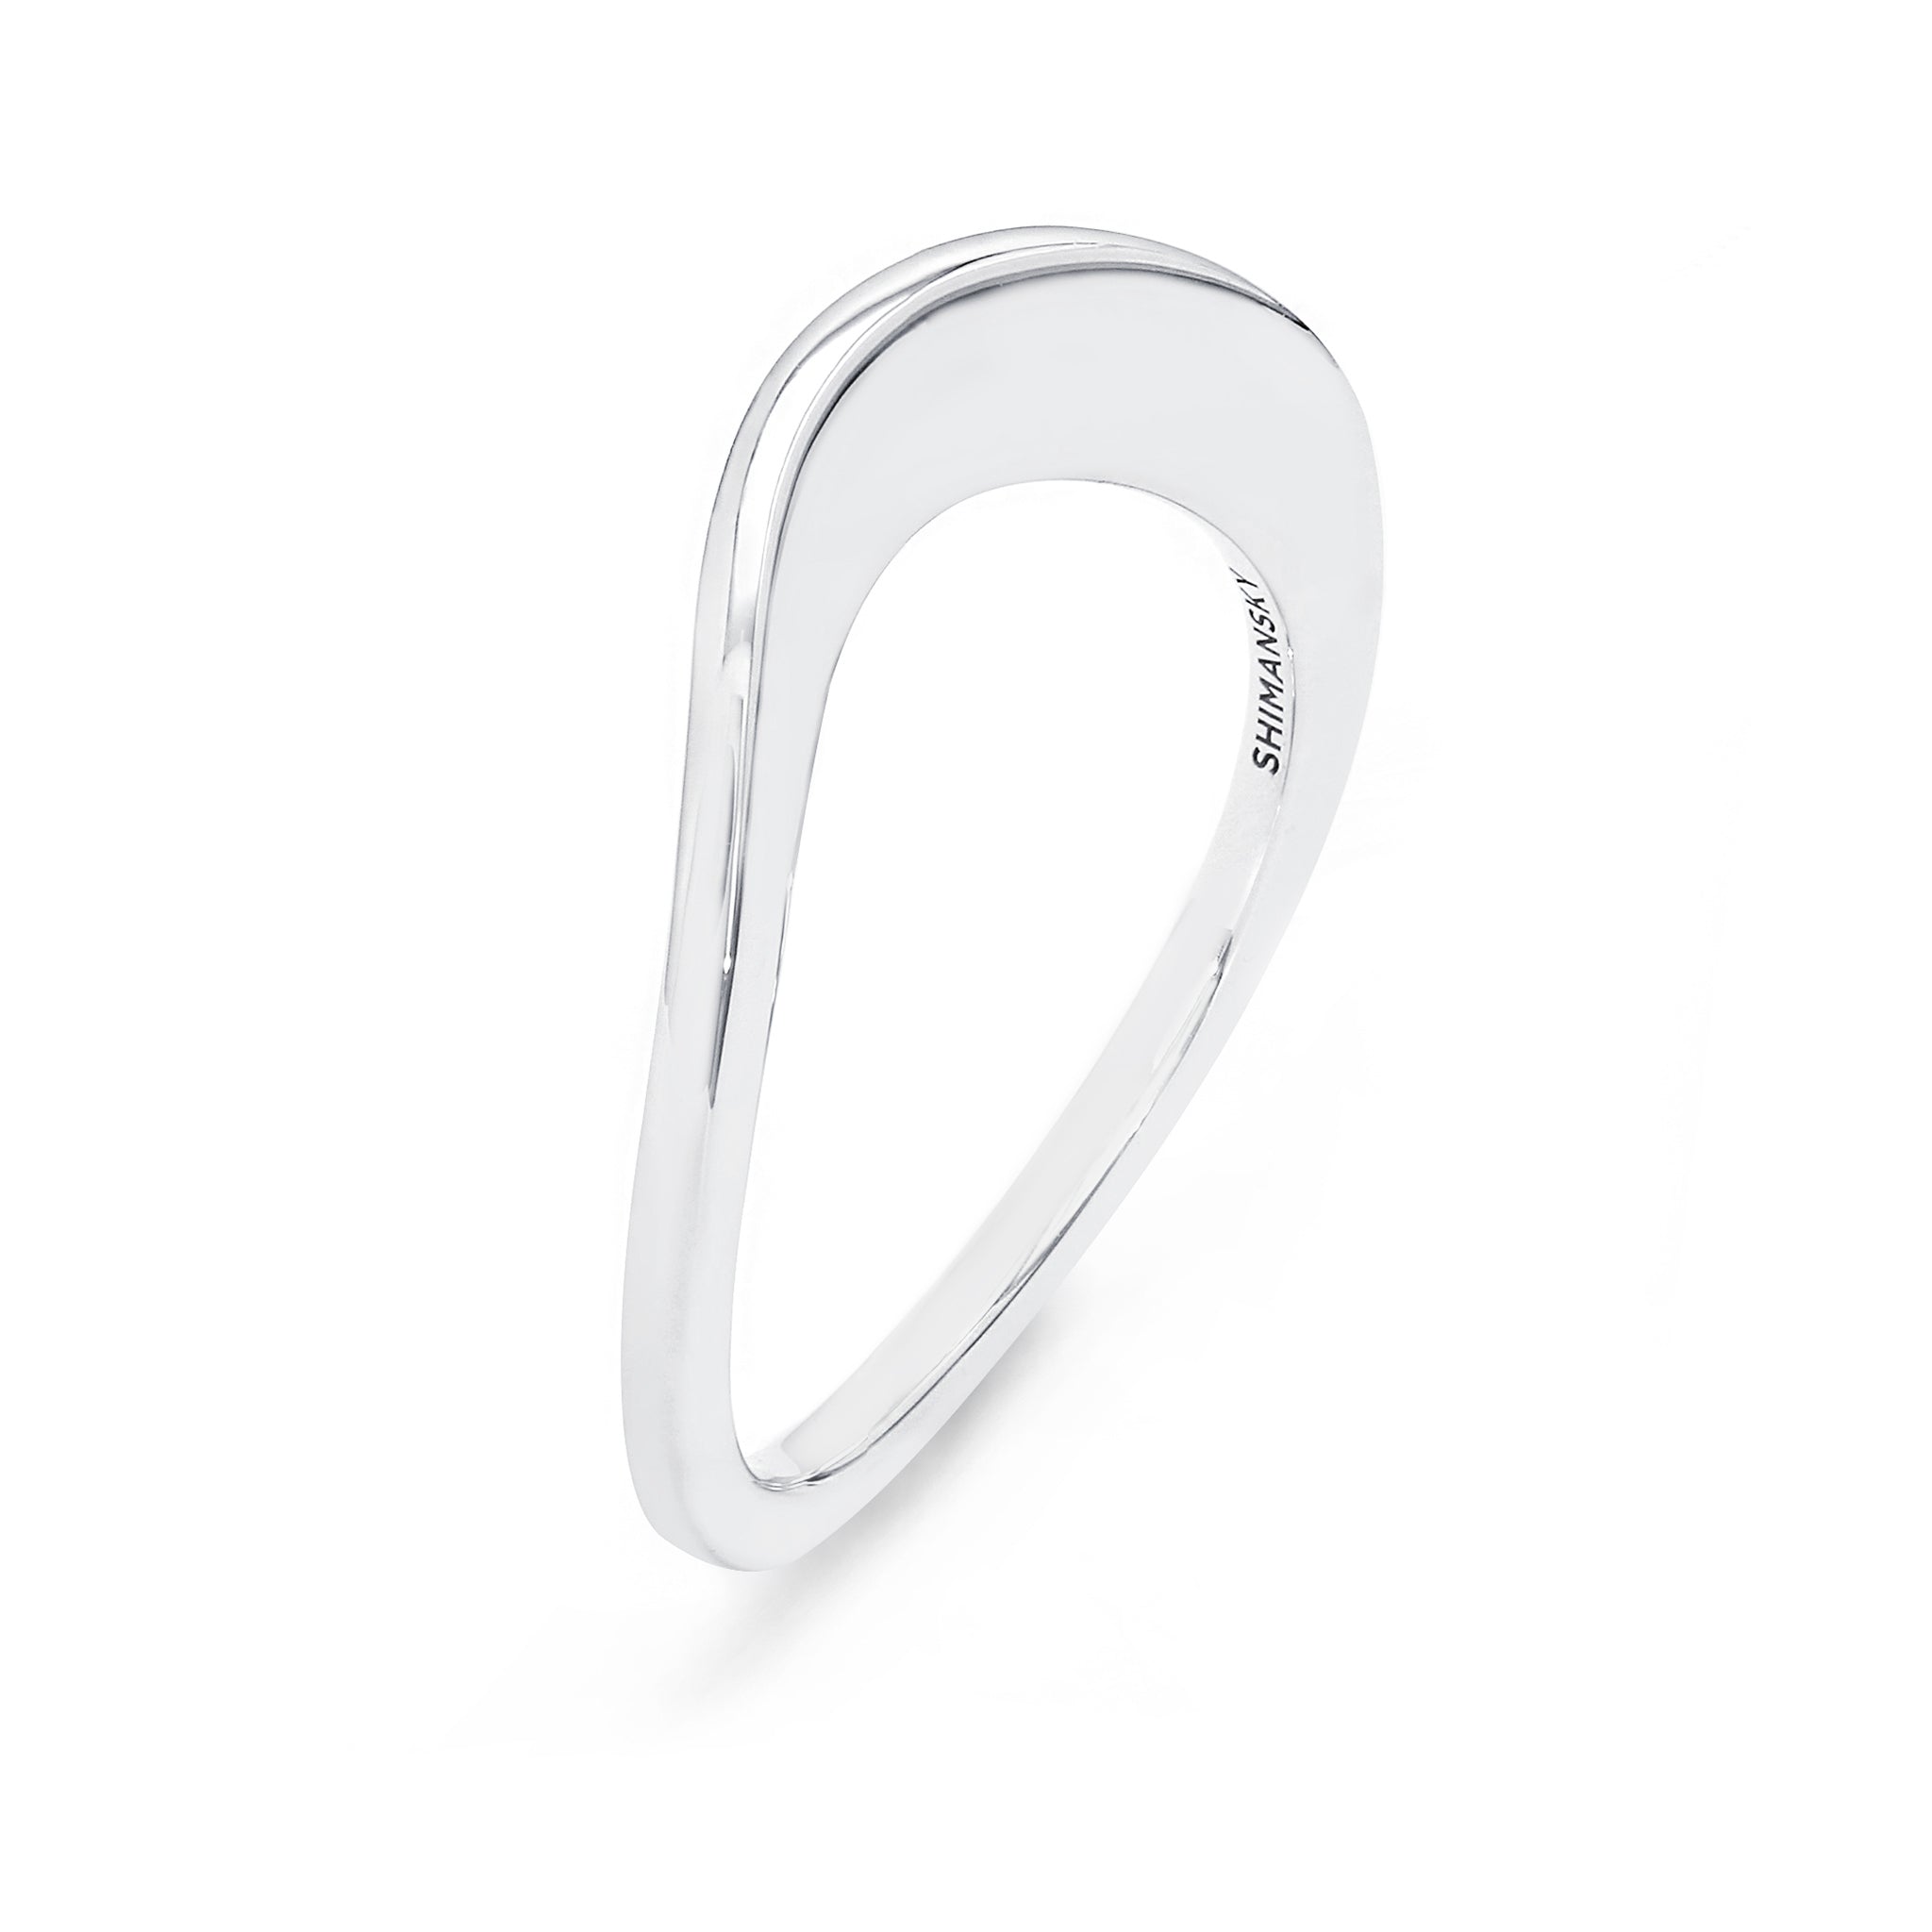 Shimansky - Silhouette Wedding Band crafted in 18K White Gold